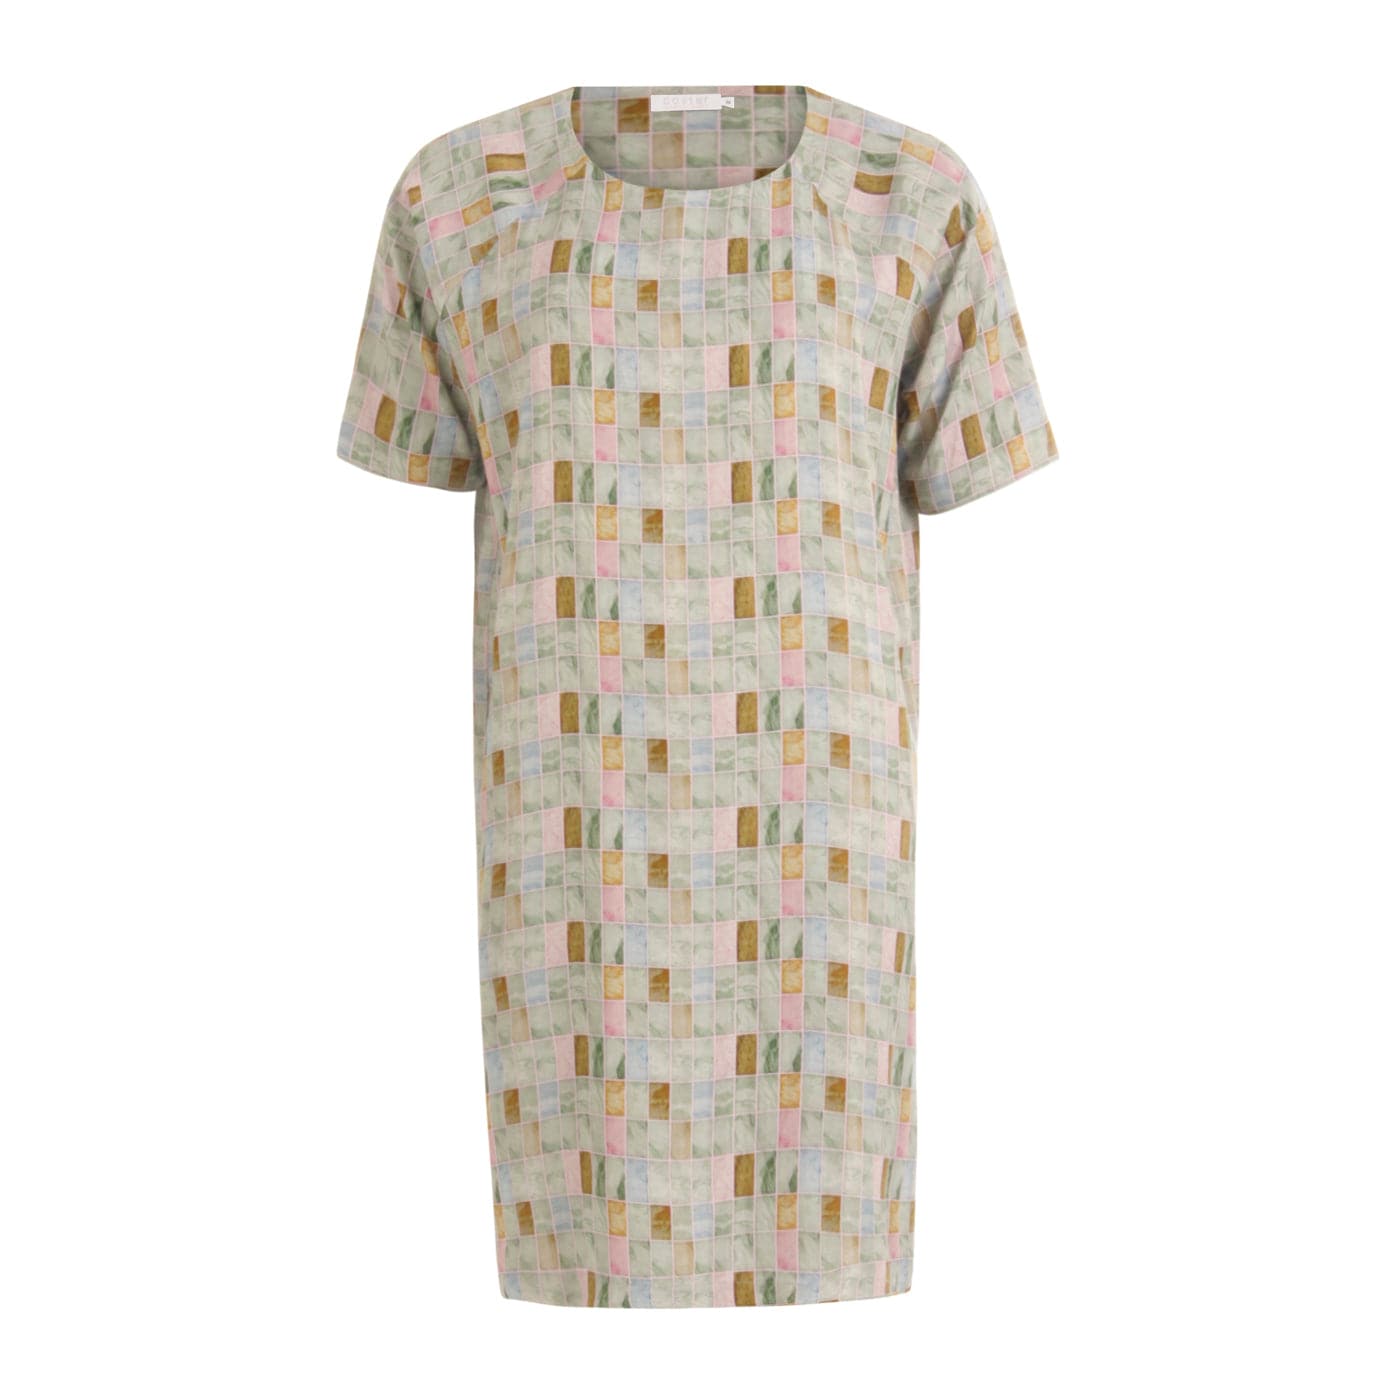 Coster Copenhagen dress with tile print - Your Style Your Story